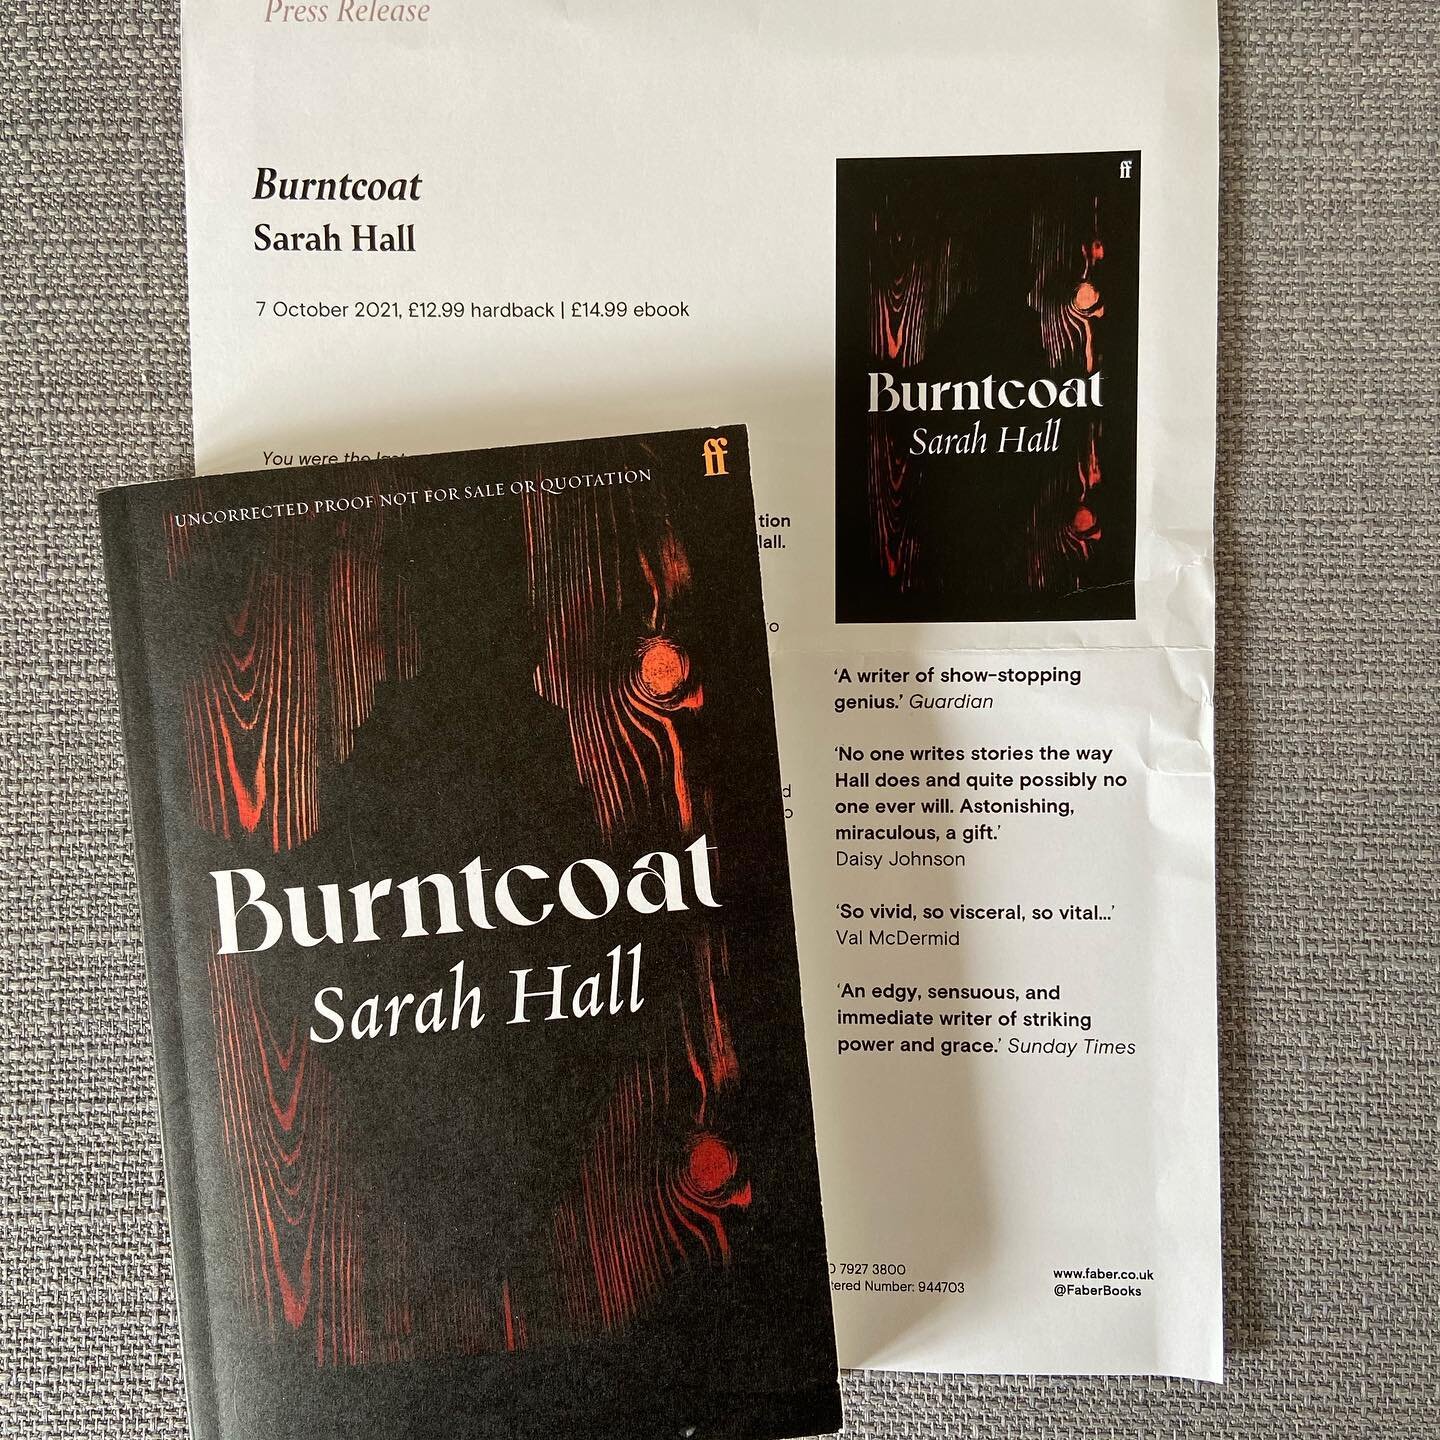 I love that we&rsquo;re starting to see authors responses to the pandemic. Thanks for #Burntcoat, @faberbooks.